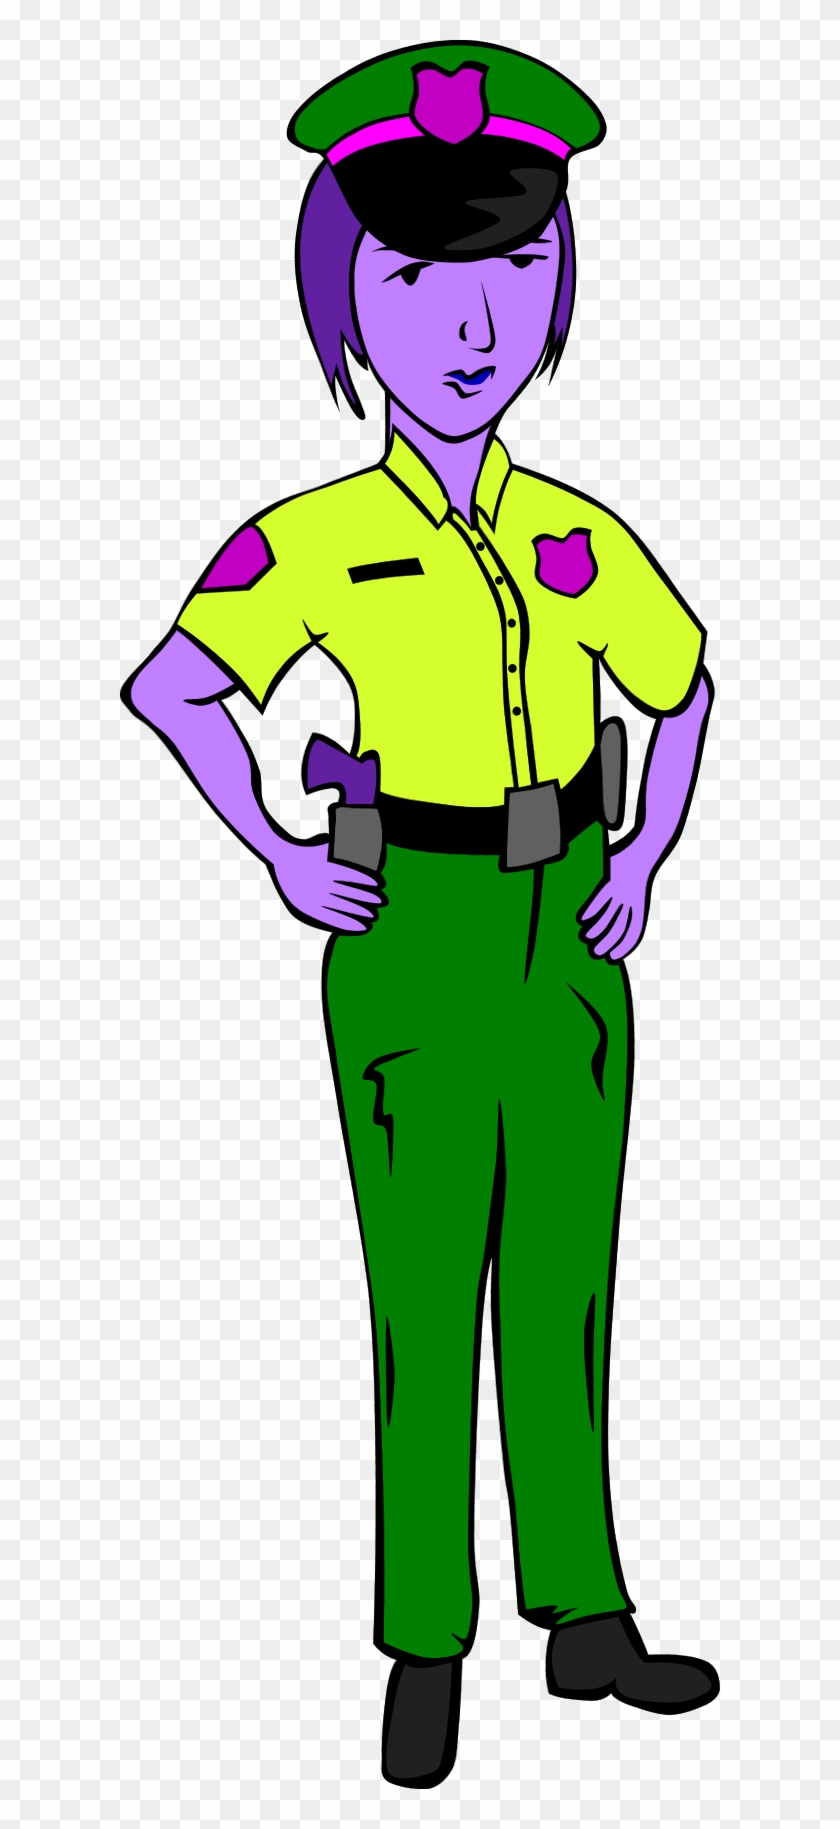 Large Woman Police Officer Clipart - Police Officer Clipart #376559